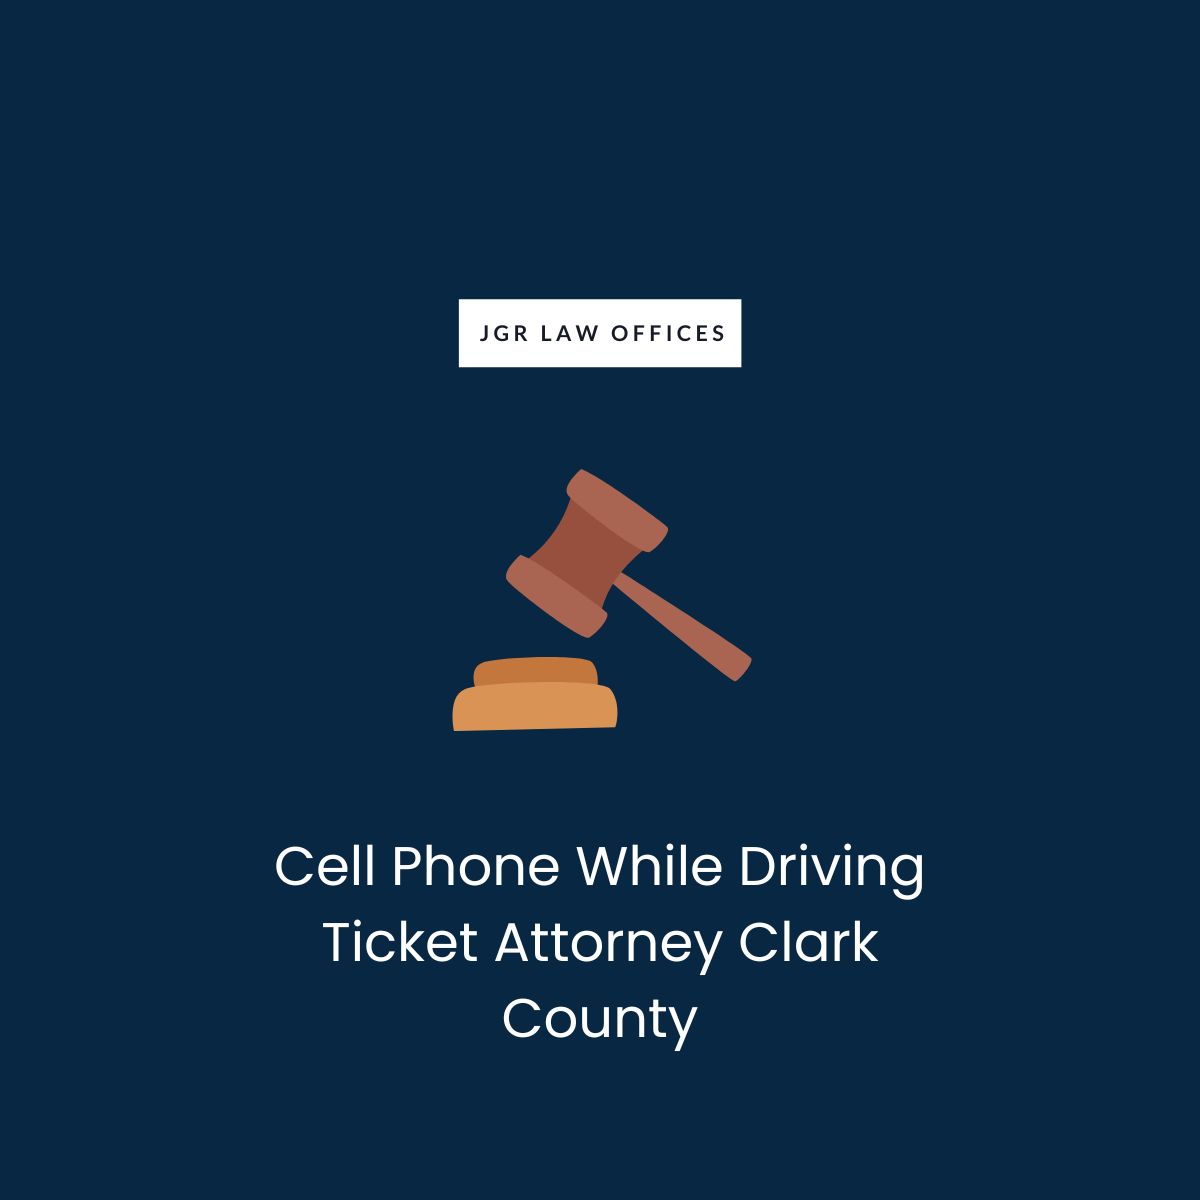 Cell Phone While Driving Ticket Attorney Clark County